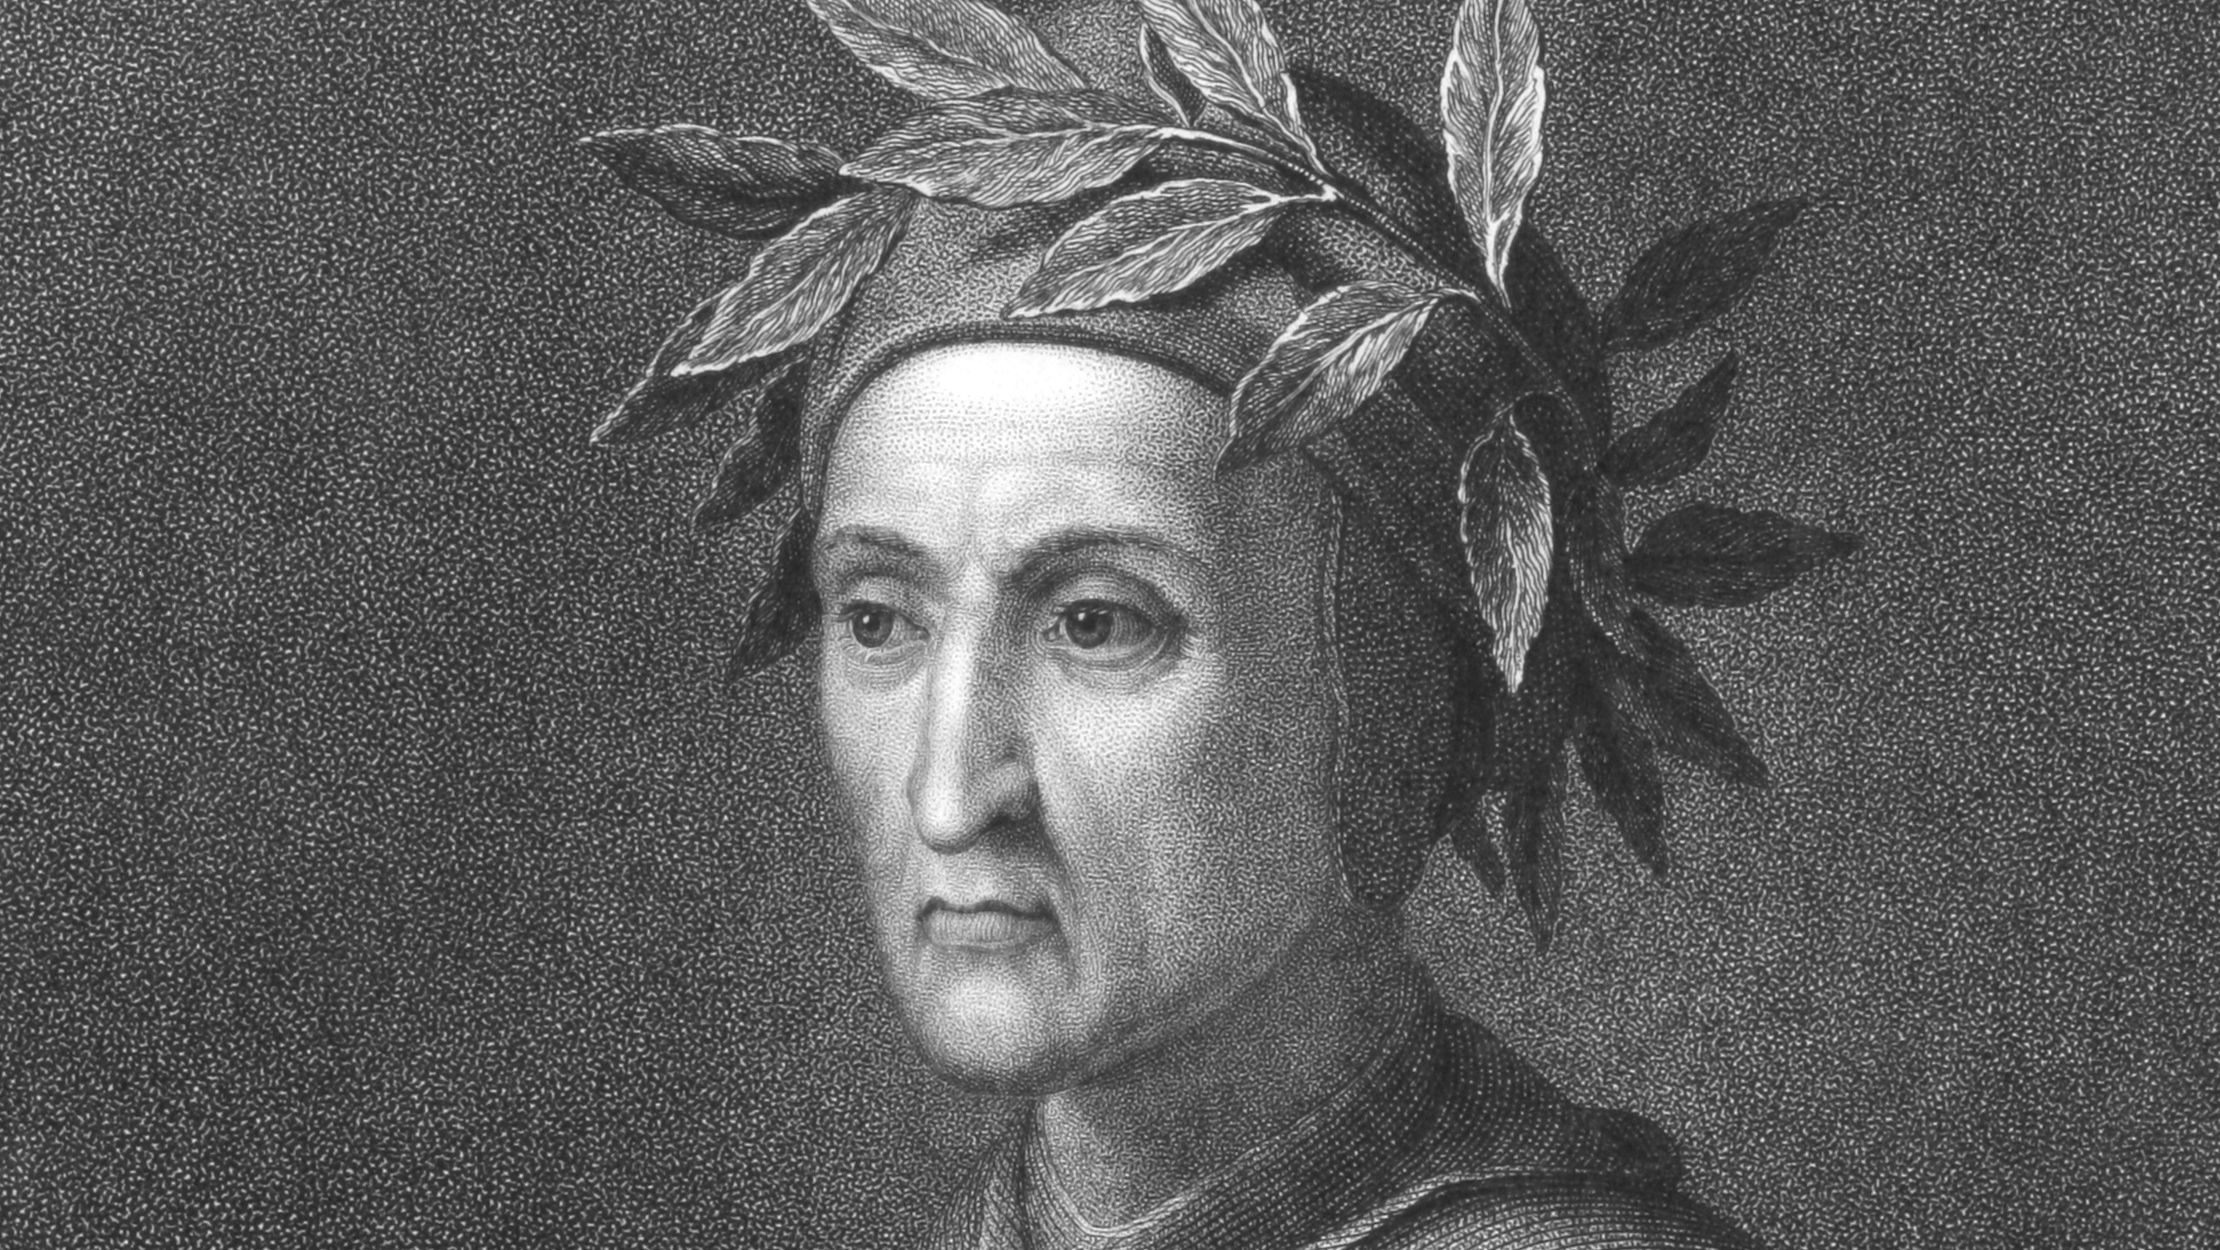 Dante Alighieri Biography & Facts: The Divine Comedy, Inferno, and Quotes